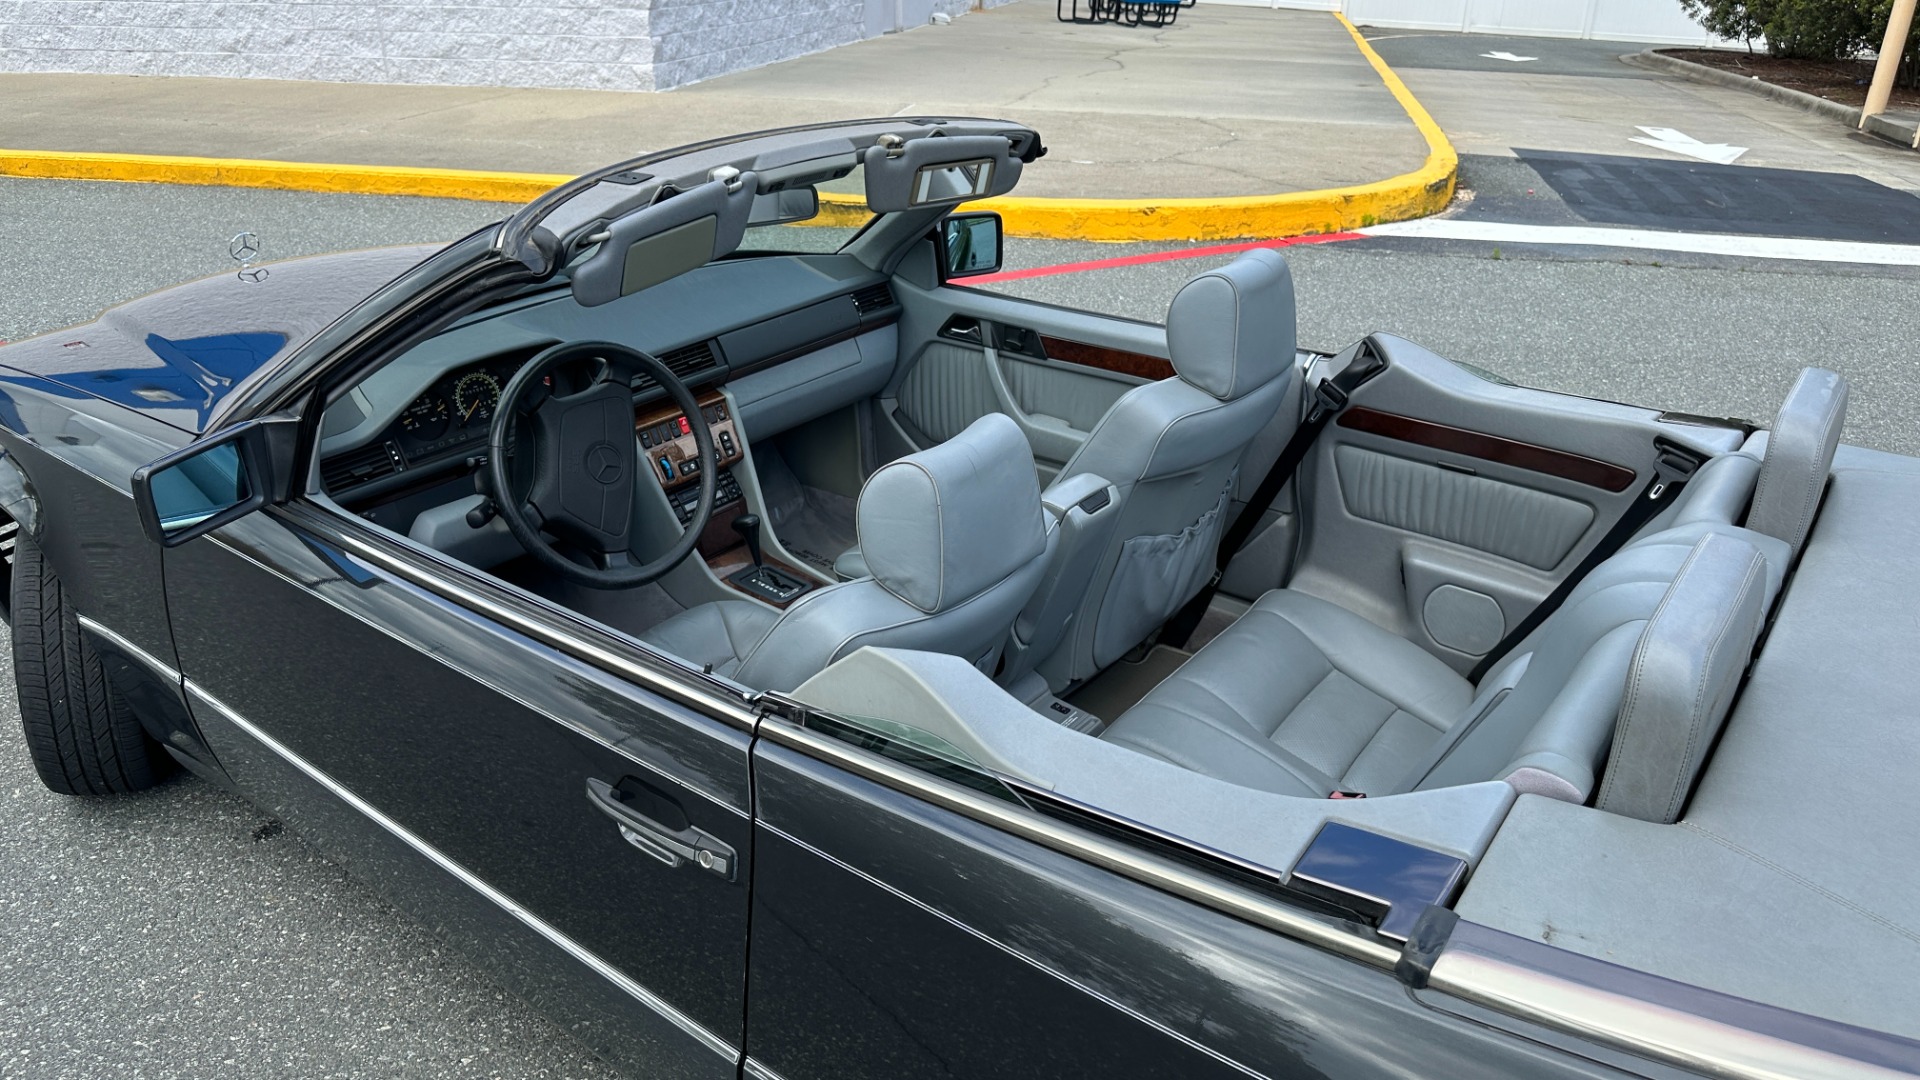 Used 1994 Mercedes-Benz 300 Series E 320 / CONVERTIBLE / MEMORY / POWER TOP / INLINE 6CYL / LEATHER for sale $23,500 at Formula Imports in Charlotte NC 28227 37